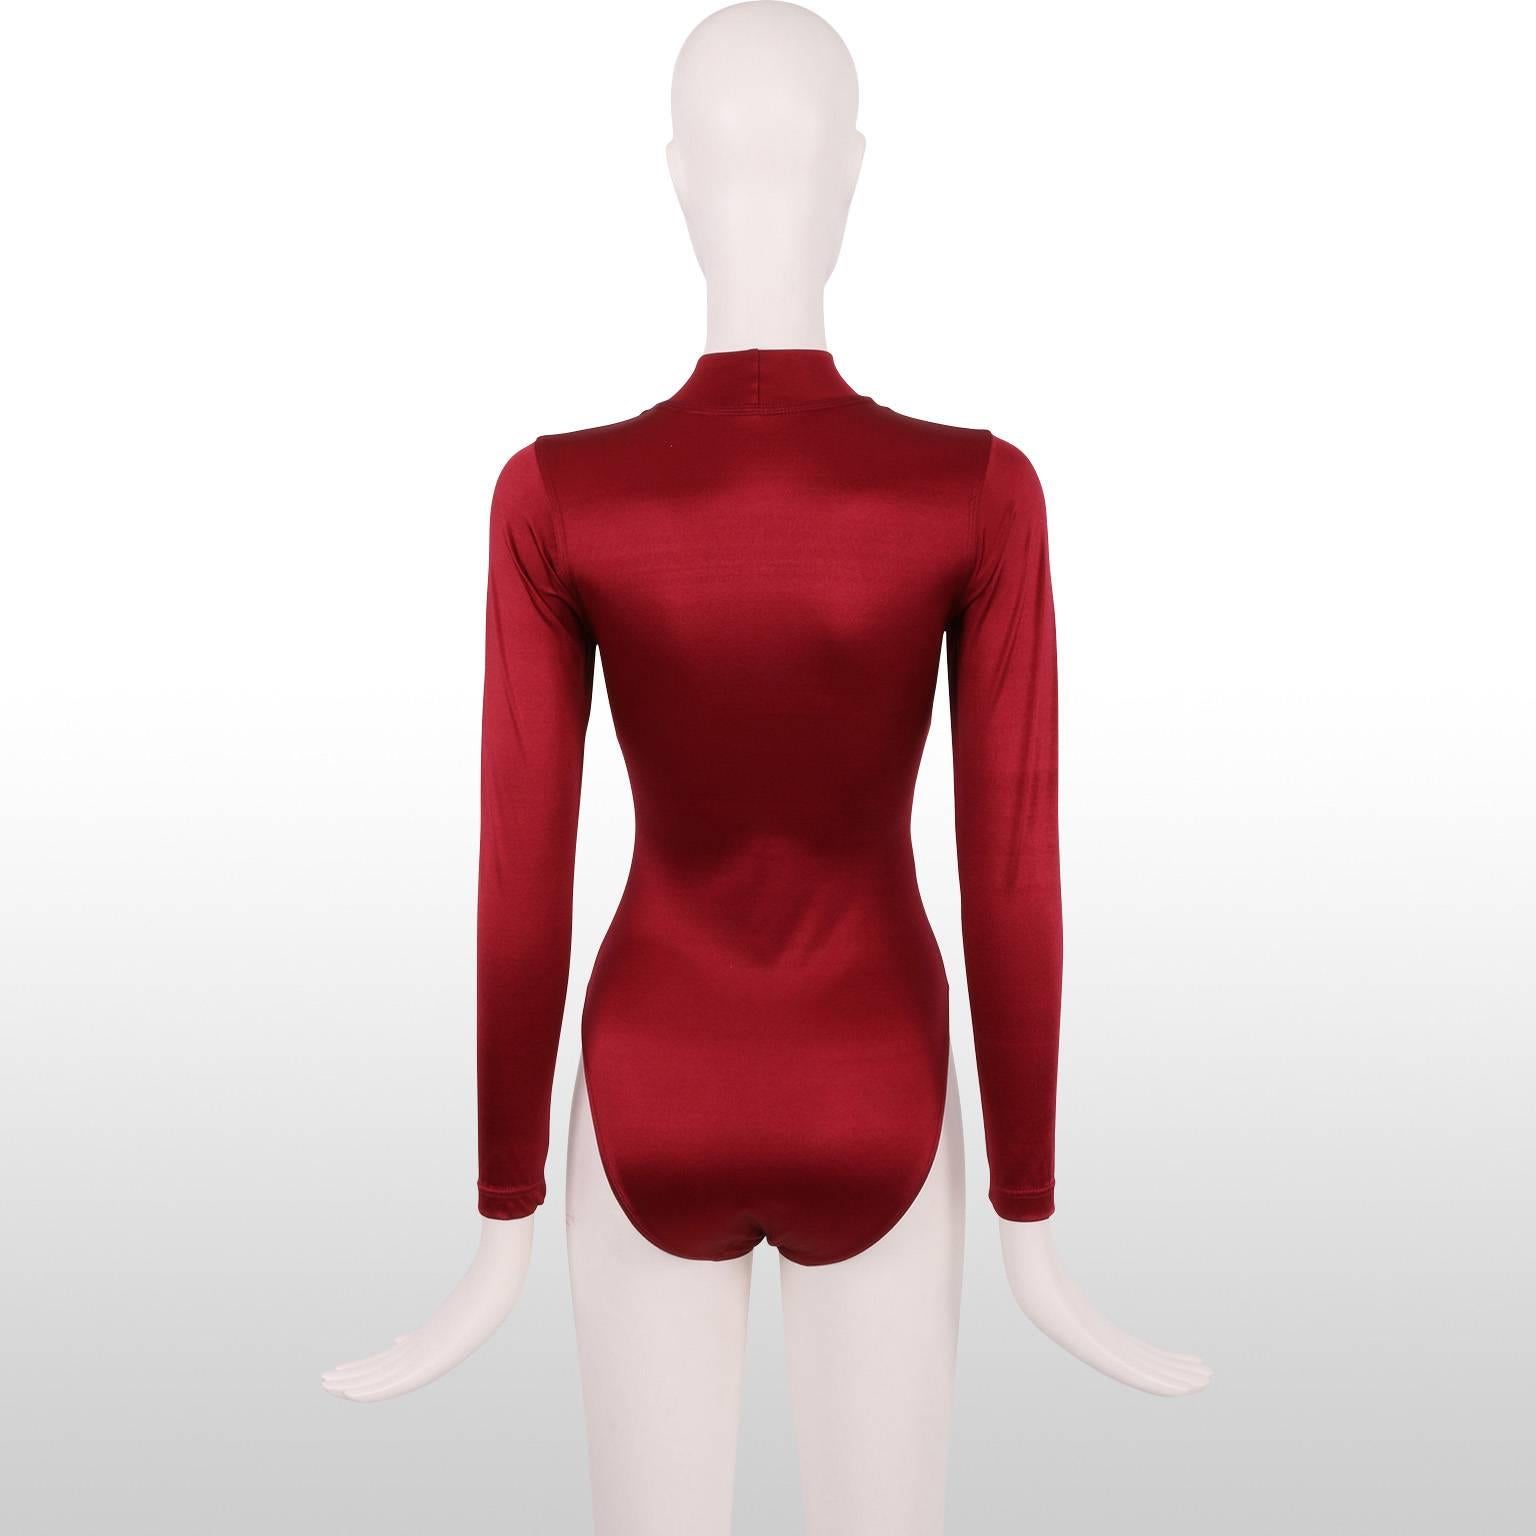 Women's 1980s Chrissie Walsh Ruby Red Metallic Body Suit For Sale